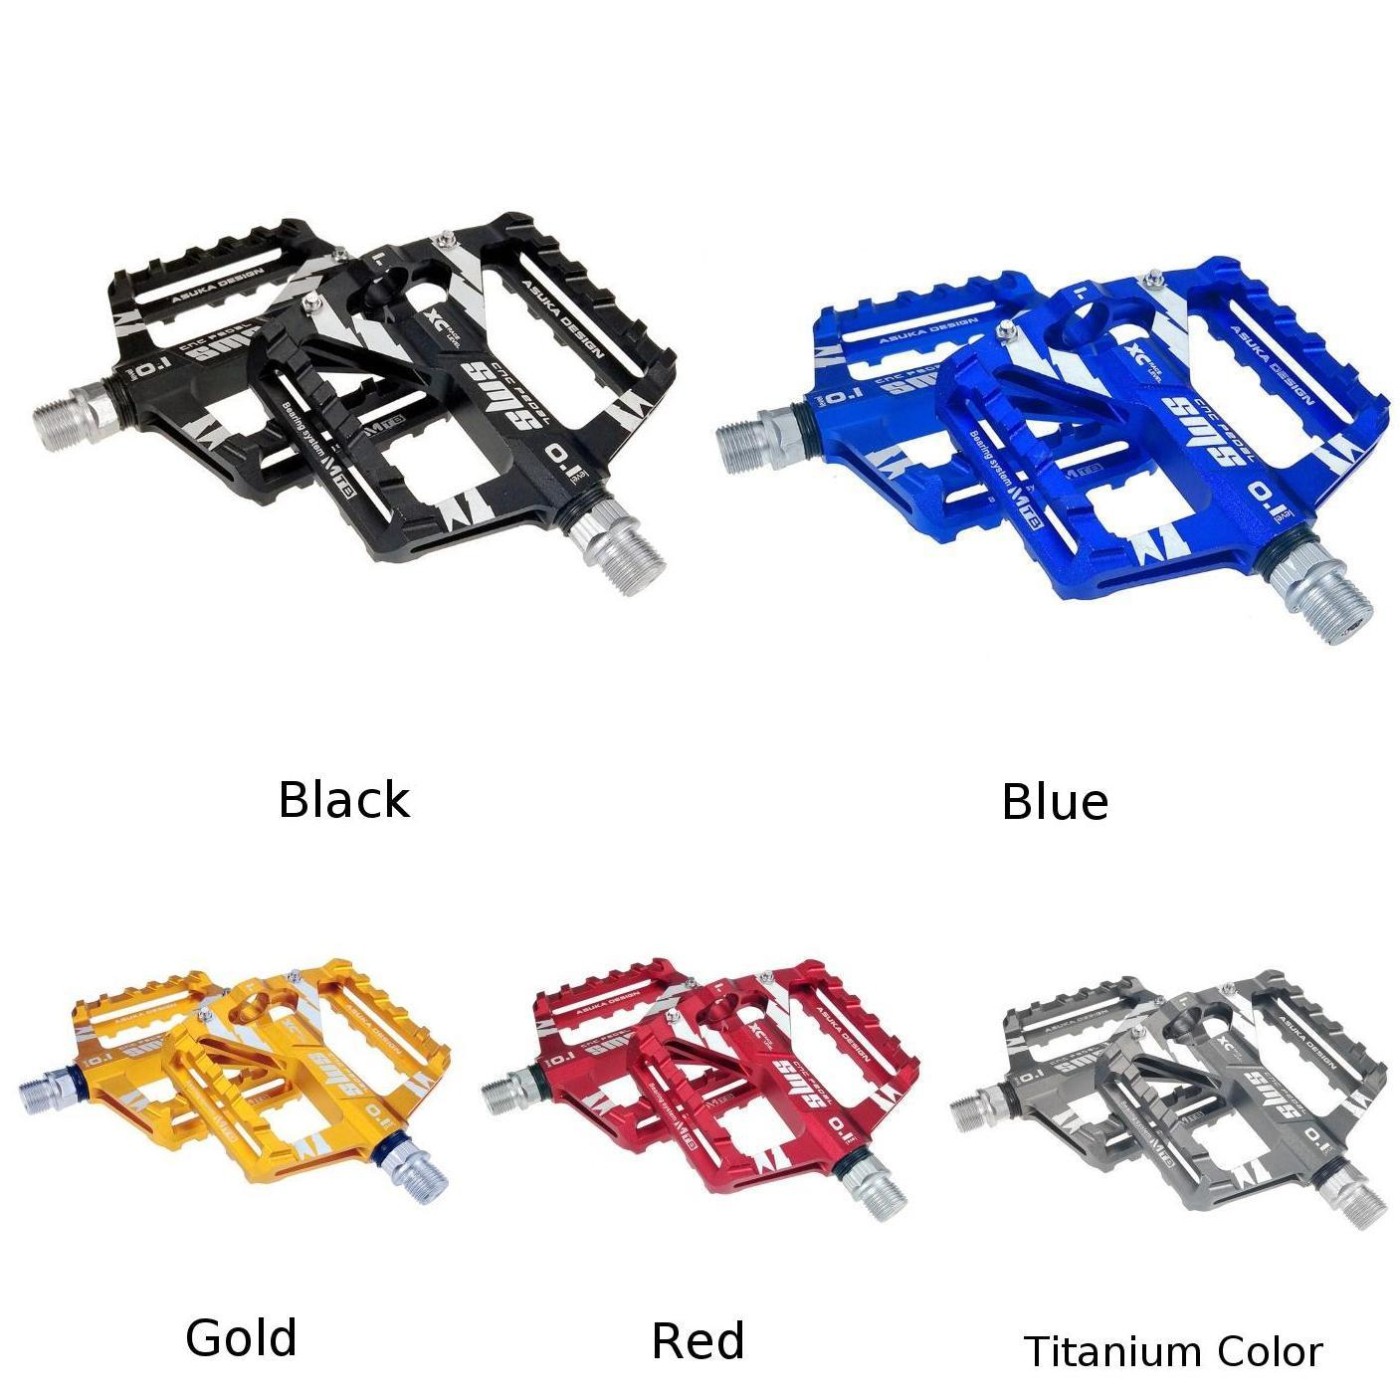 Details about   Attachment Pedals Replacement Set Aluminum Alloy Bearing Bicycle Mountain